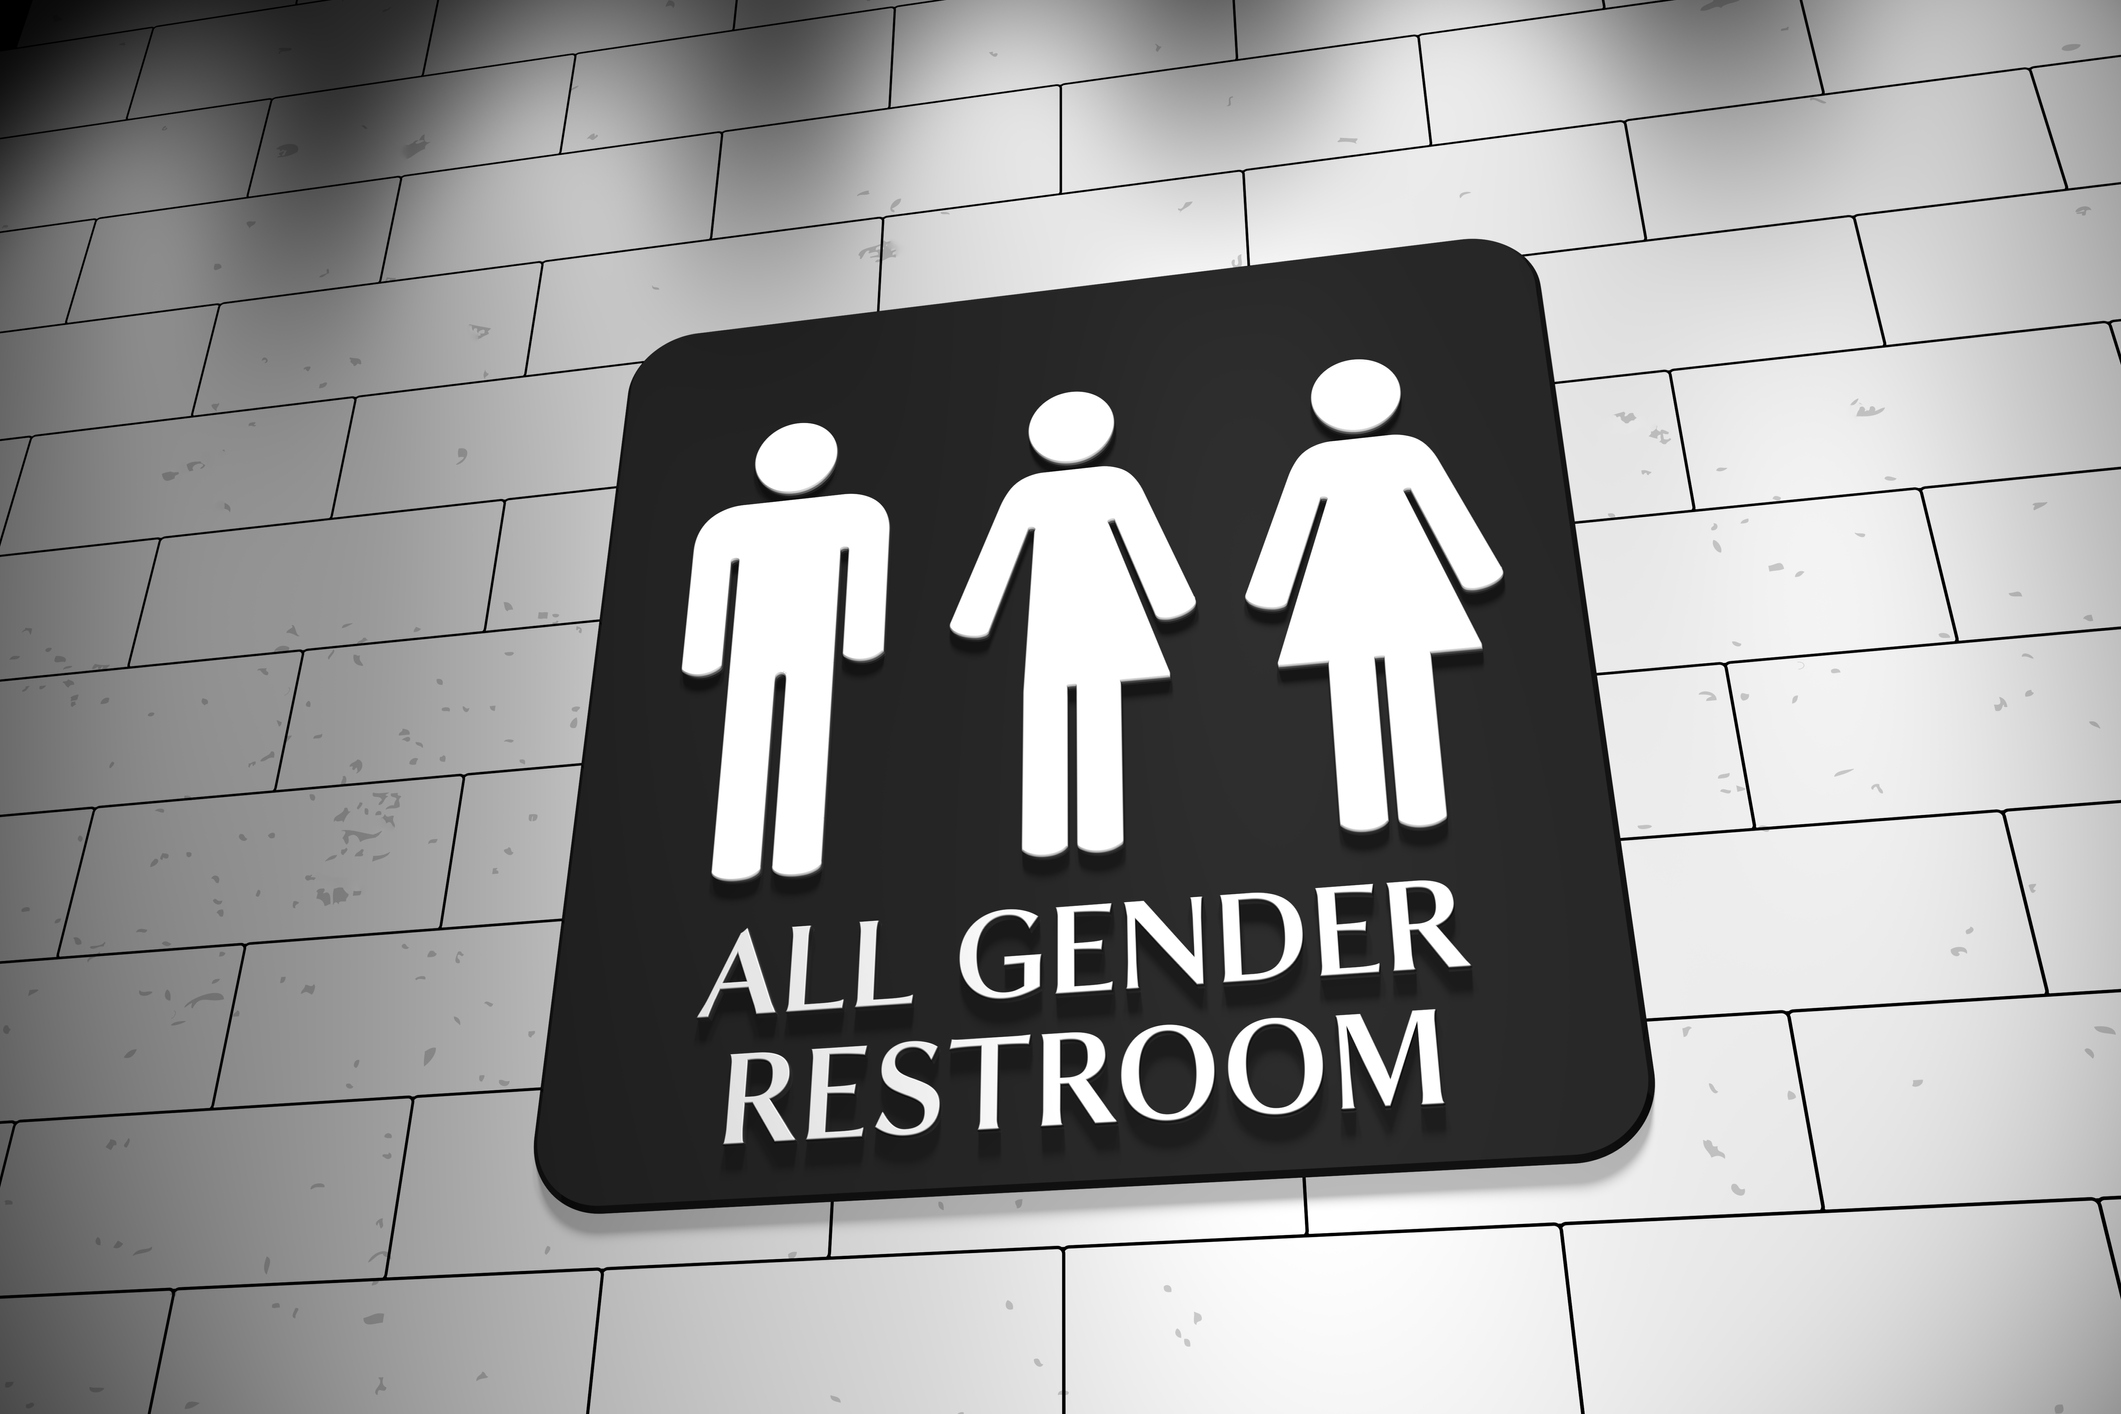 A sign on a wall for "All Gender Restroom" with symbols for men, trans and women